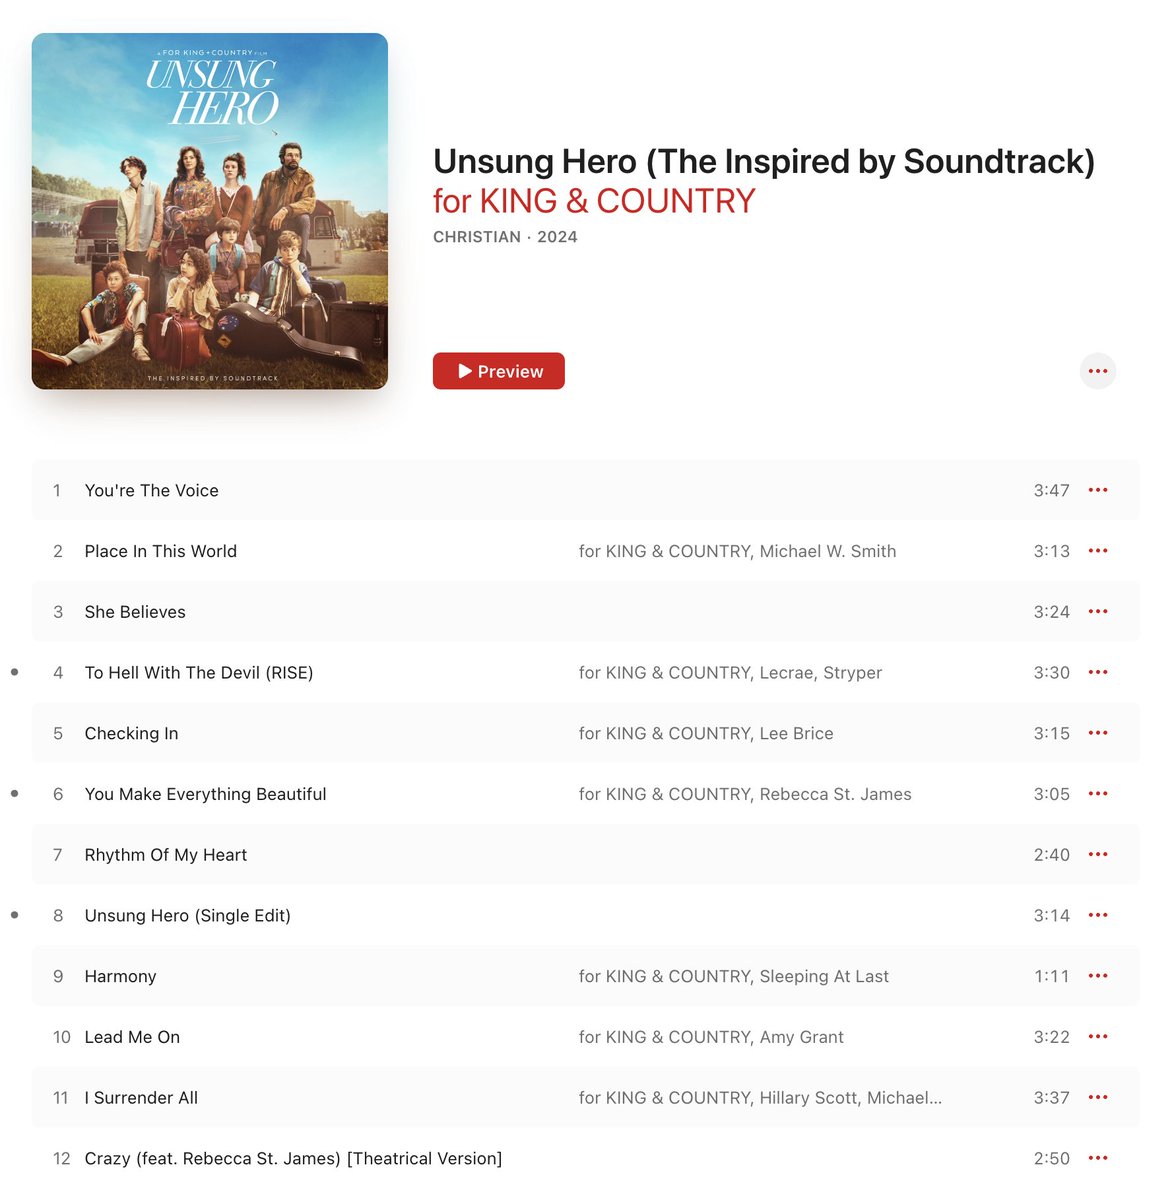 Have you checked out the #UnsungHeroMovie Inspired By Soundtrack on iTunes? music.apple.com/us/album/17312…